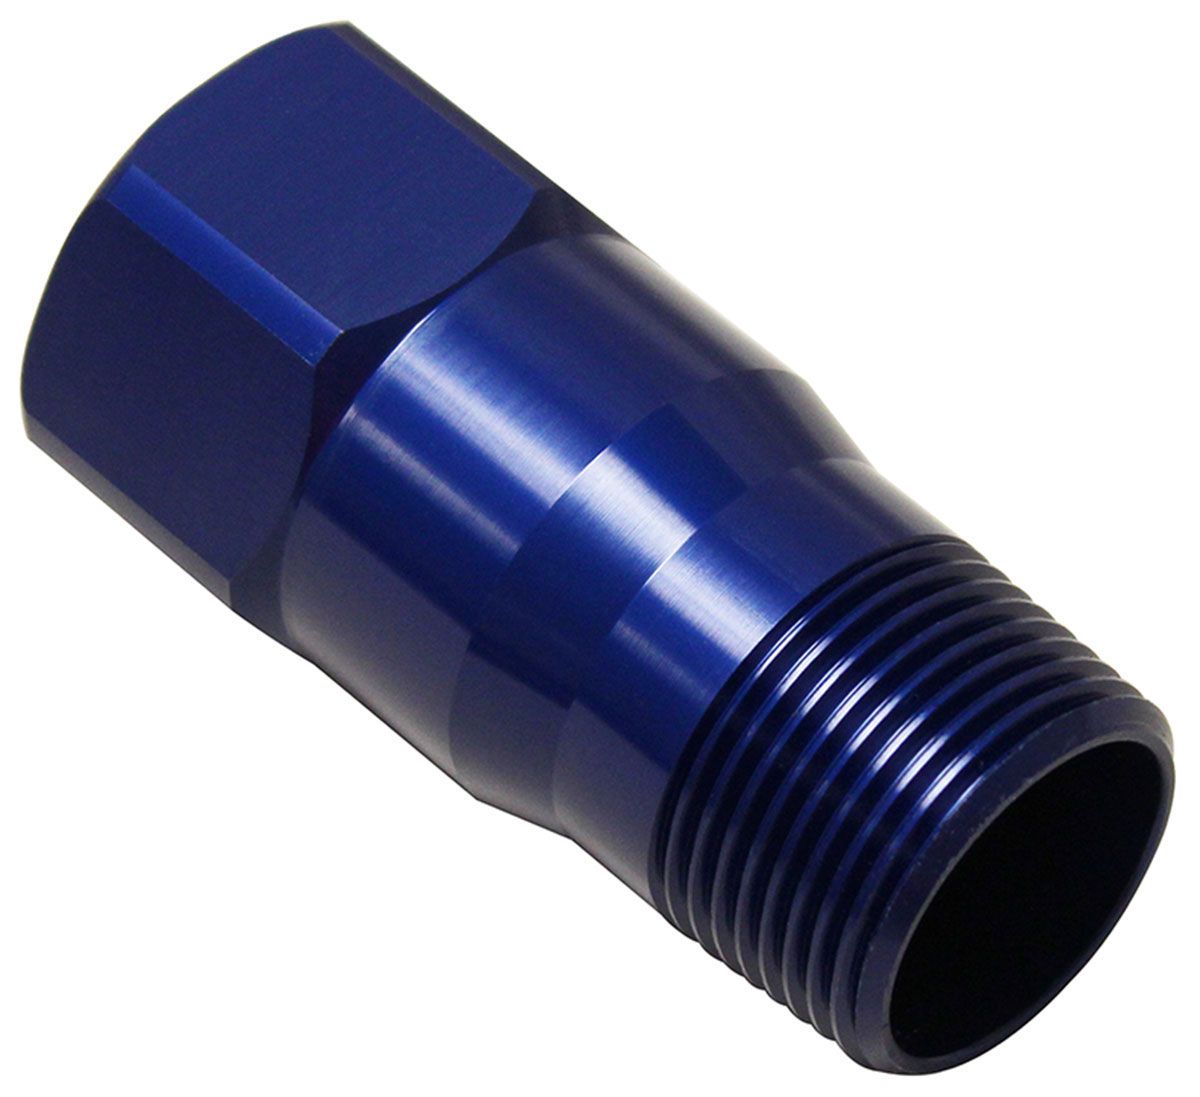 MZWP1000B - 2" LONG EXTENDED FITTING